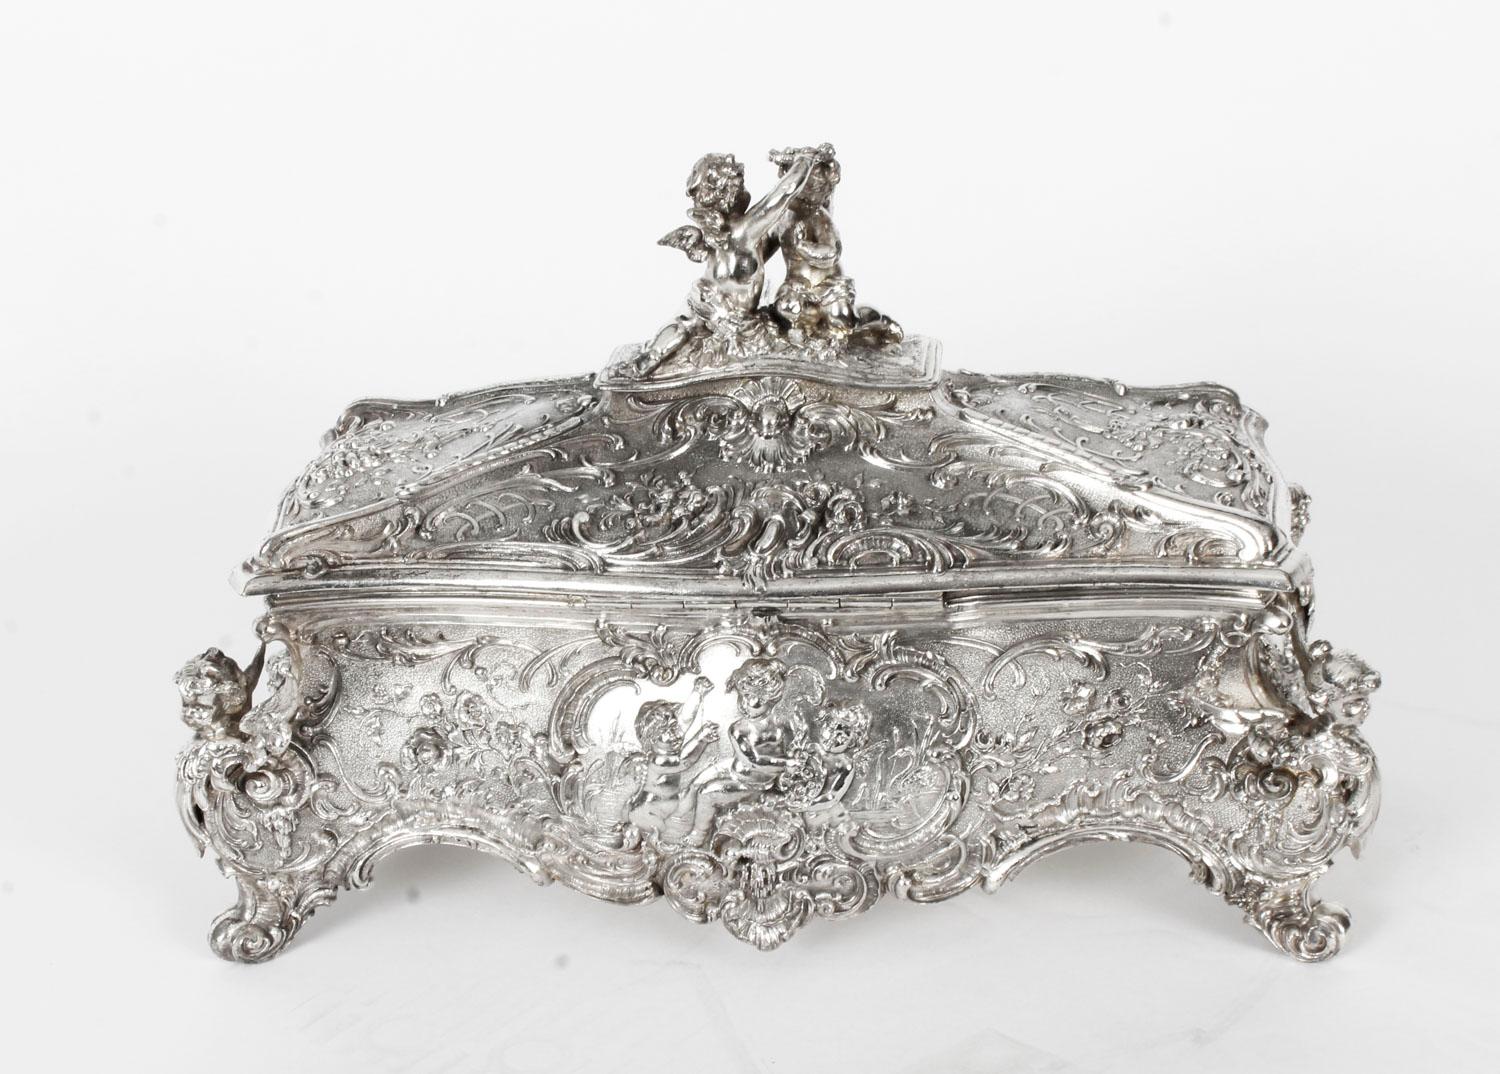 This is a beautiful Antique German silver plated casket bearing the makers mark of the world renowned silversmith firm of WMF, Metallwarenfabrik Straub & Schweizer circa 1890 in date.
 
This wonderful casket is of very high quality and features